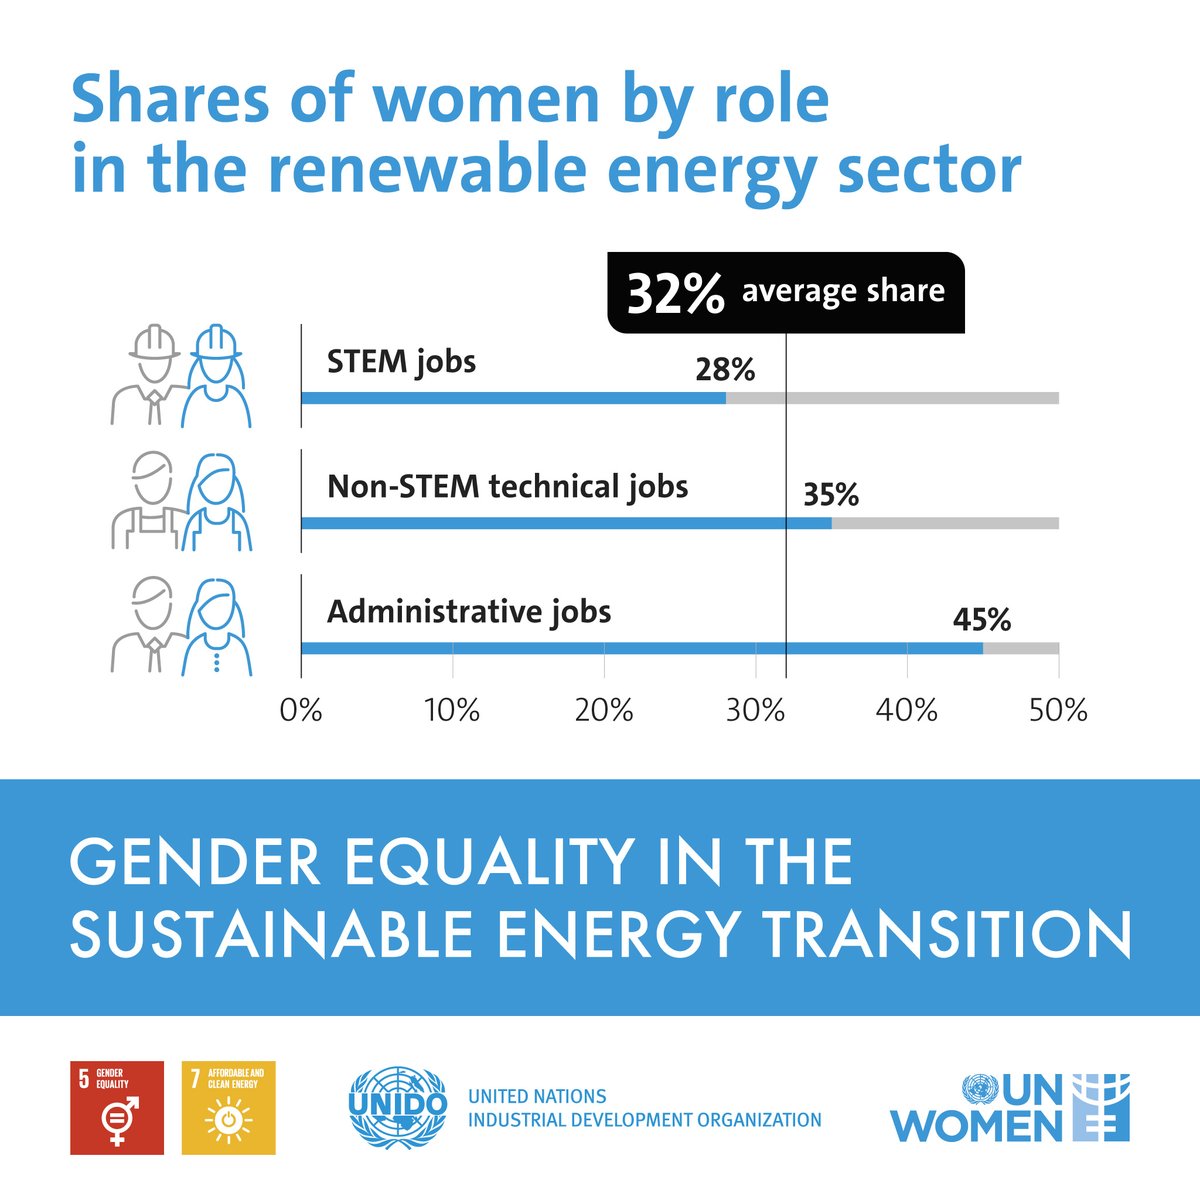 Only 32% That's the percentage of women in the #RenewableEnergy workforce. We need policies that help women and girls overcome barriers in the energy sector. 👉 Check out our joint Gender Equality in the Sustainable Energy Transition Guide with @UNIDO: unwo.men/xuit50Pu8XH